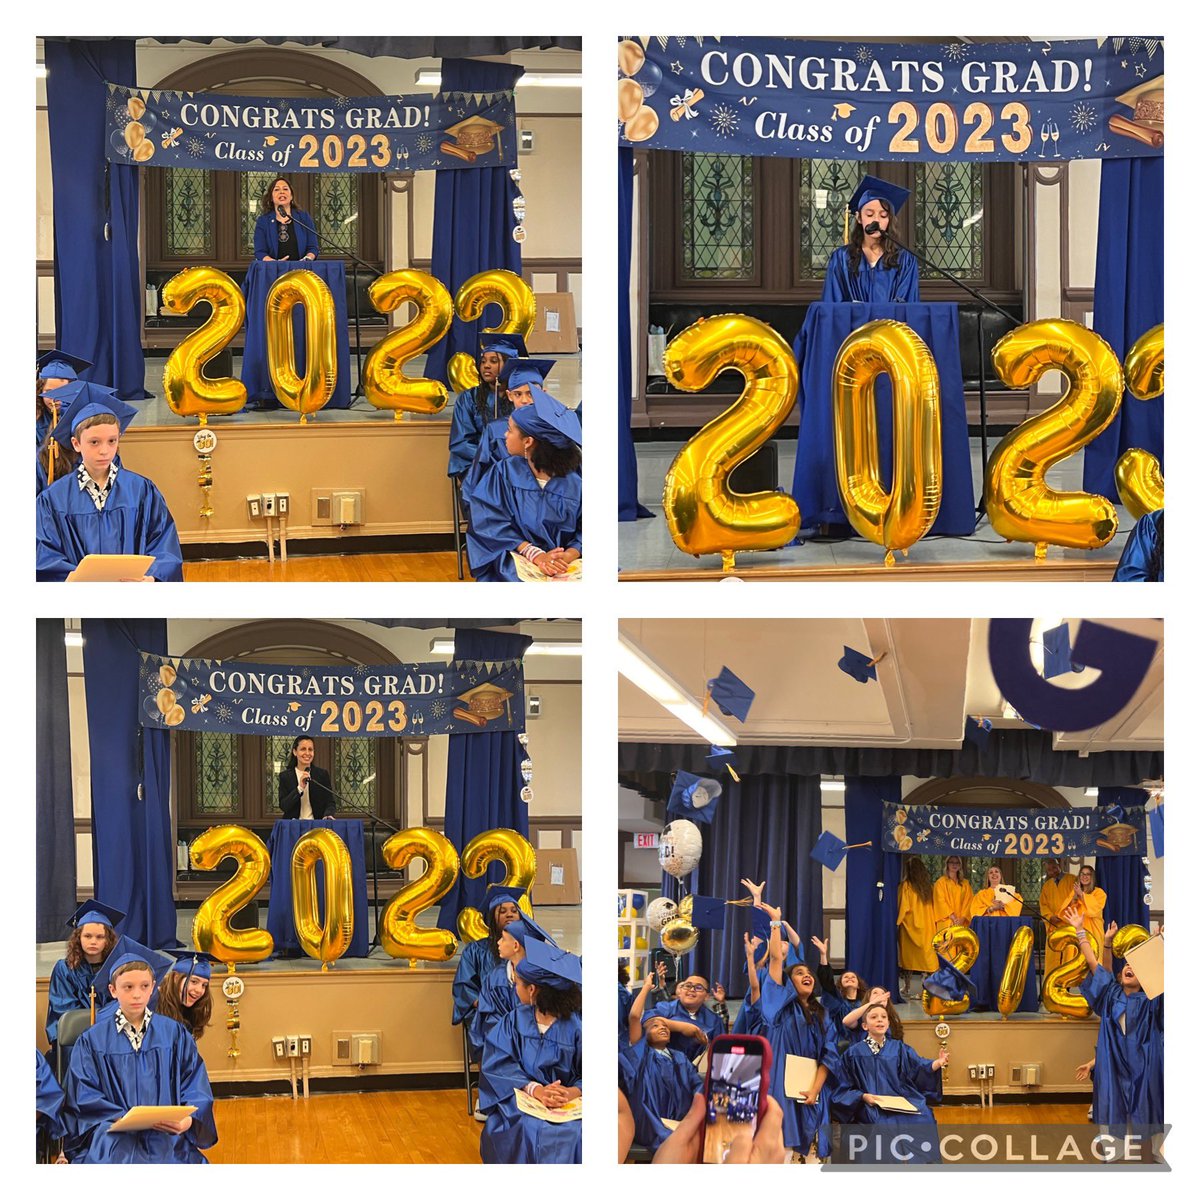 What an incredible and emotional day at our 5th graduation! Seeing our graduates walk across that stage one last time filled my heart with immense pride. Congrats to all our amazing students. You've made us all so proud! #Classof2023 #SteinwaySWAG #Team84 🔵🟡🎓